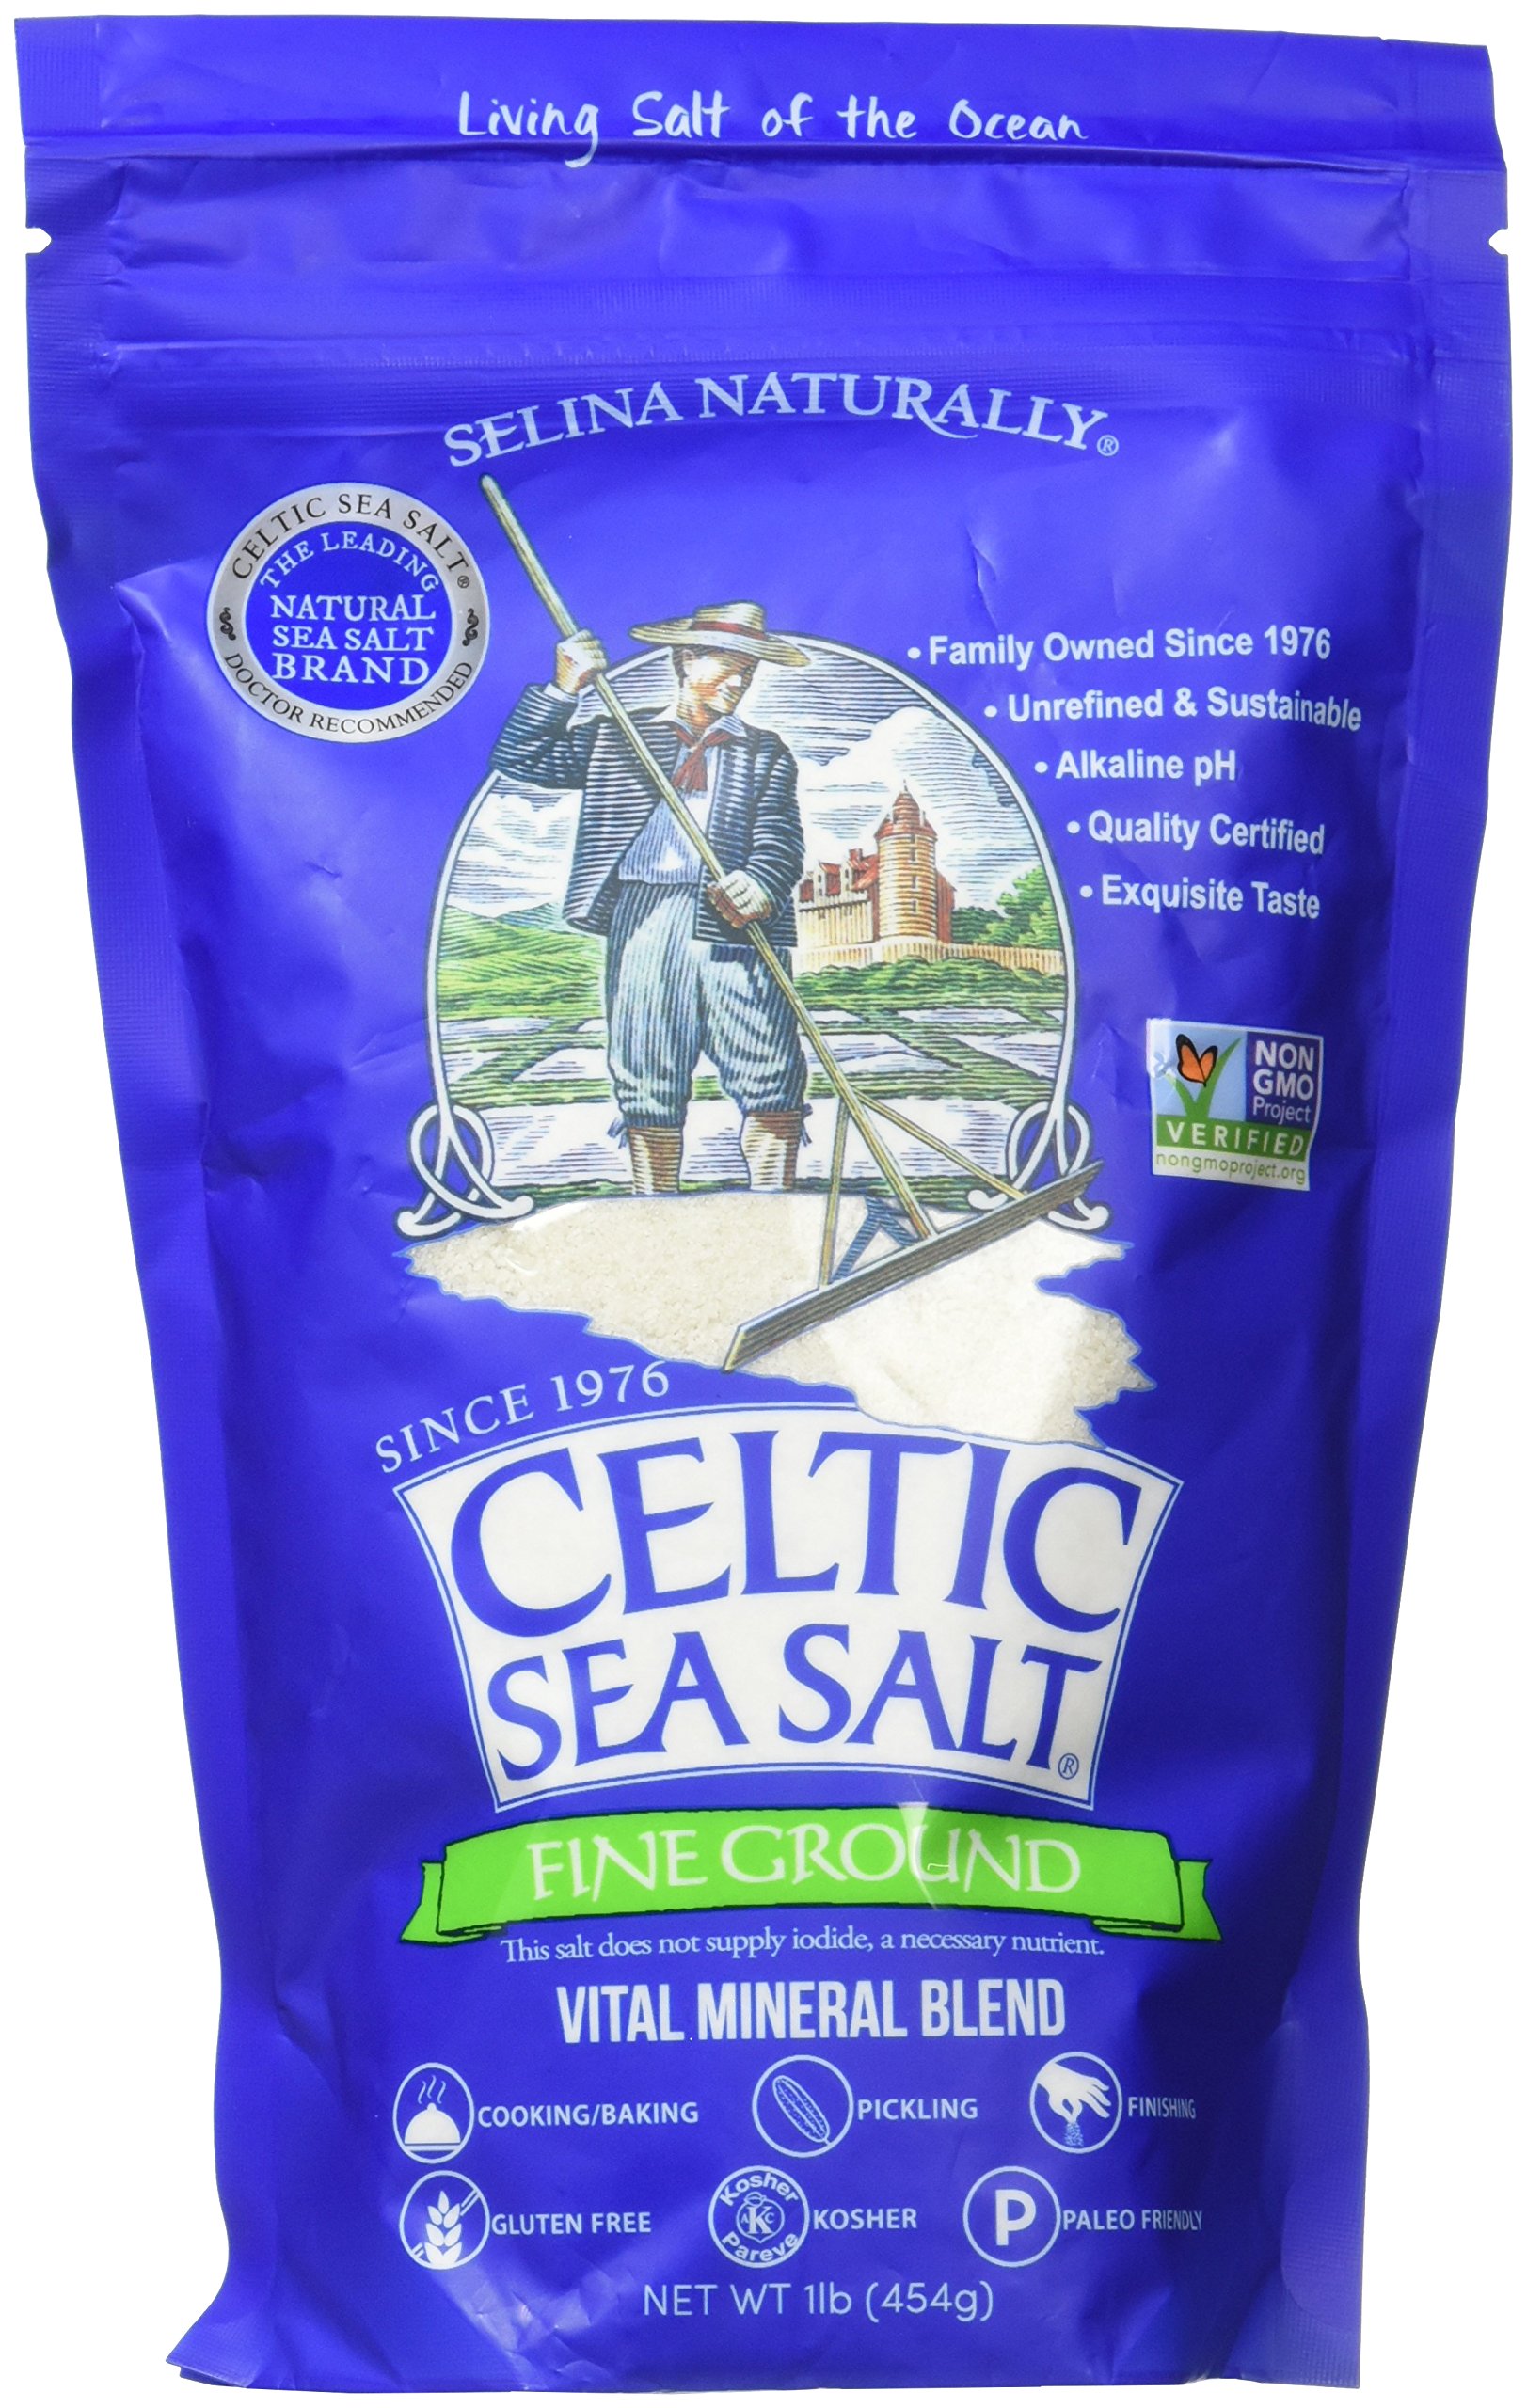 Book Cover Fine Ground Celtic Sea Salt – (1) 16 Ounce Resealable Bag of Nutritious, Classic Sea Salt, Great for Cooking, Baking, Pickling, Finishing and More, Pantry-Friendly, Gluten-Free 16 Ounce (Pack of 1) Bag Sea Salt